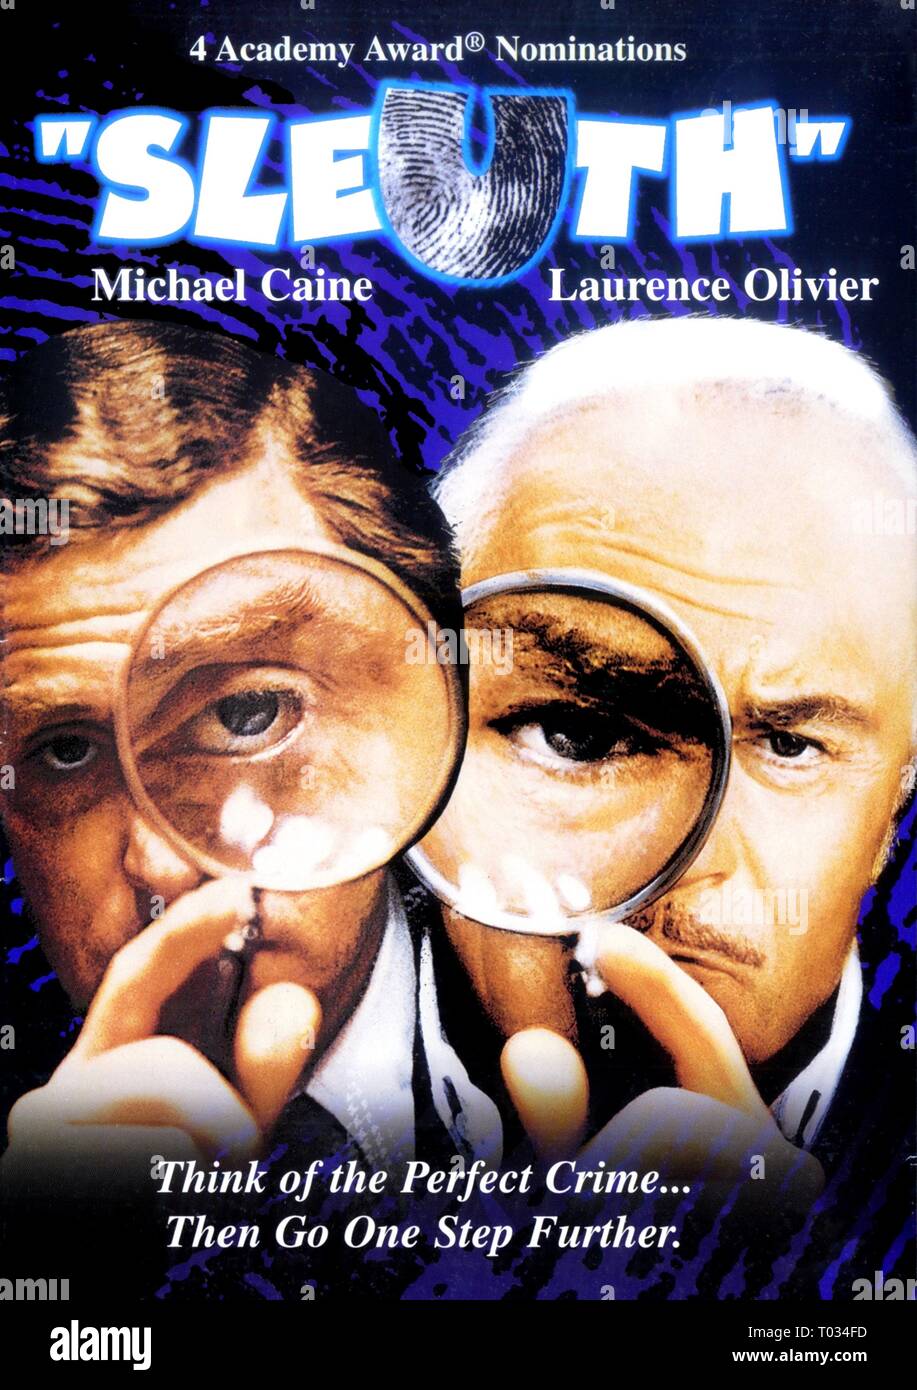 MICHAEL CAINE, Laurence Olivier, 1972 AFFICHE, SLEUTH Banque D'Images